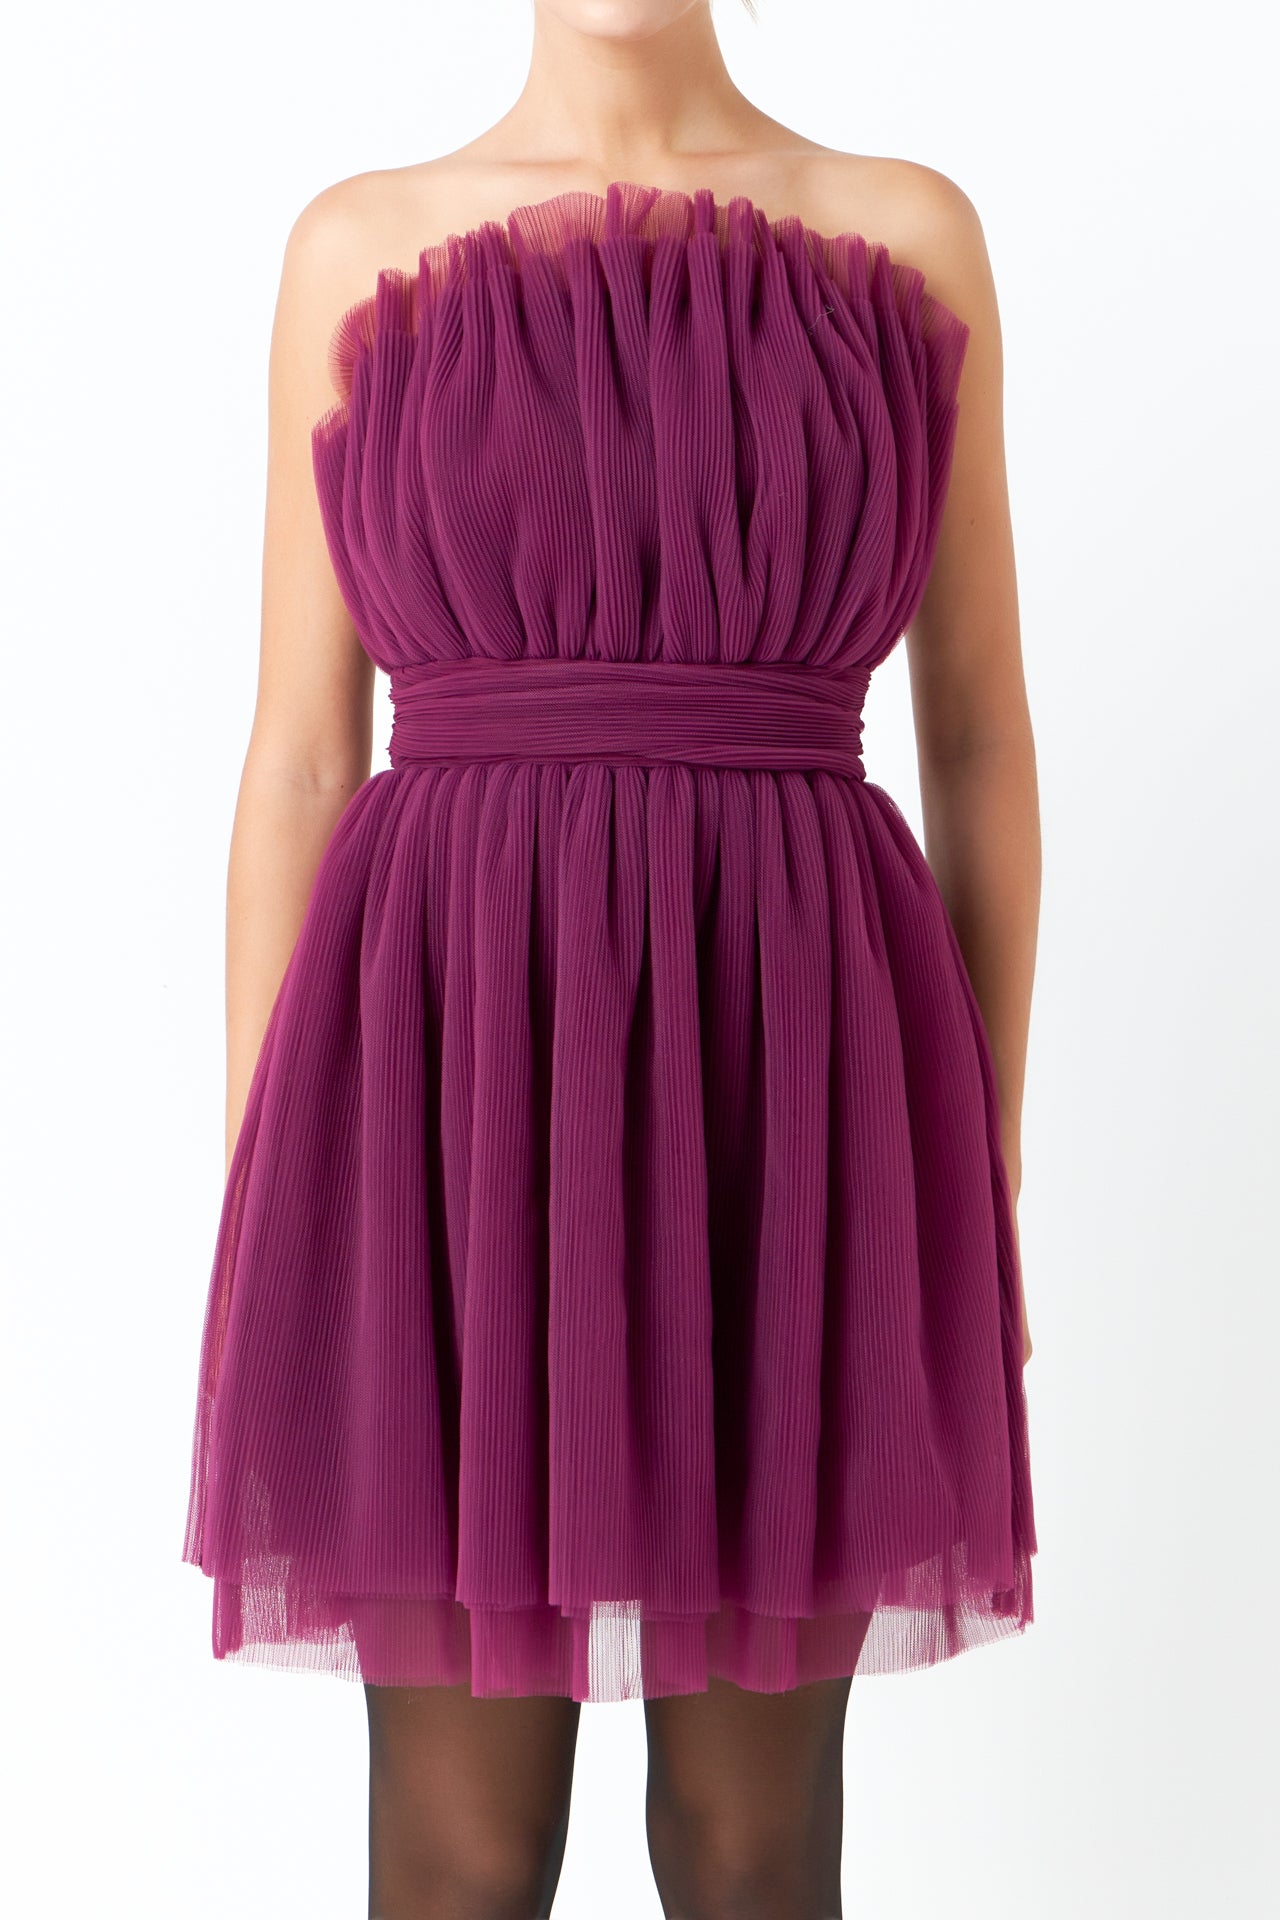 Endless Rose - Strapless Mini Tulle Dress - Dresses in Women's Clothing available at endlessrose.com